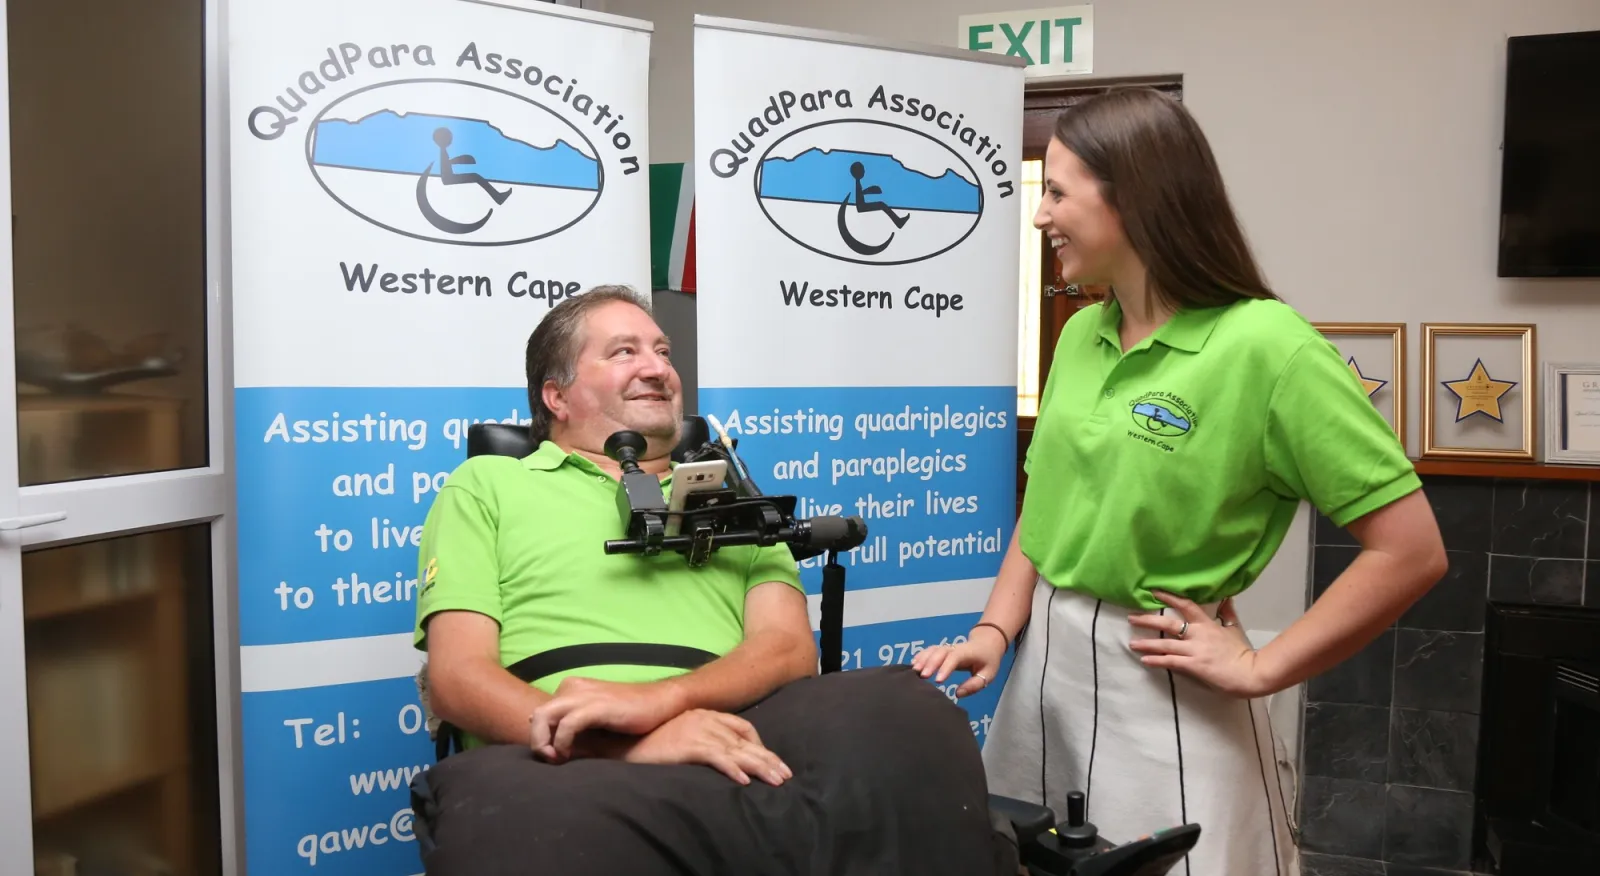 A man and a woman are talking and smiling in front of a QuadPara Association sign. They are both wearing bright green shirts and the man is in a wheelchair